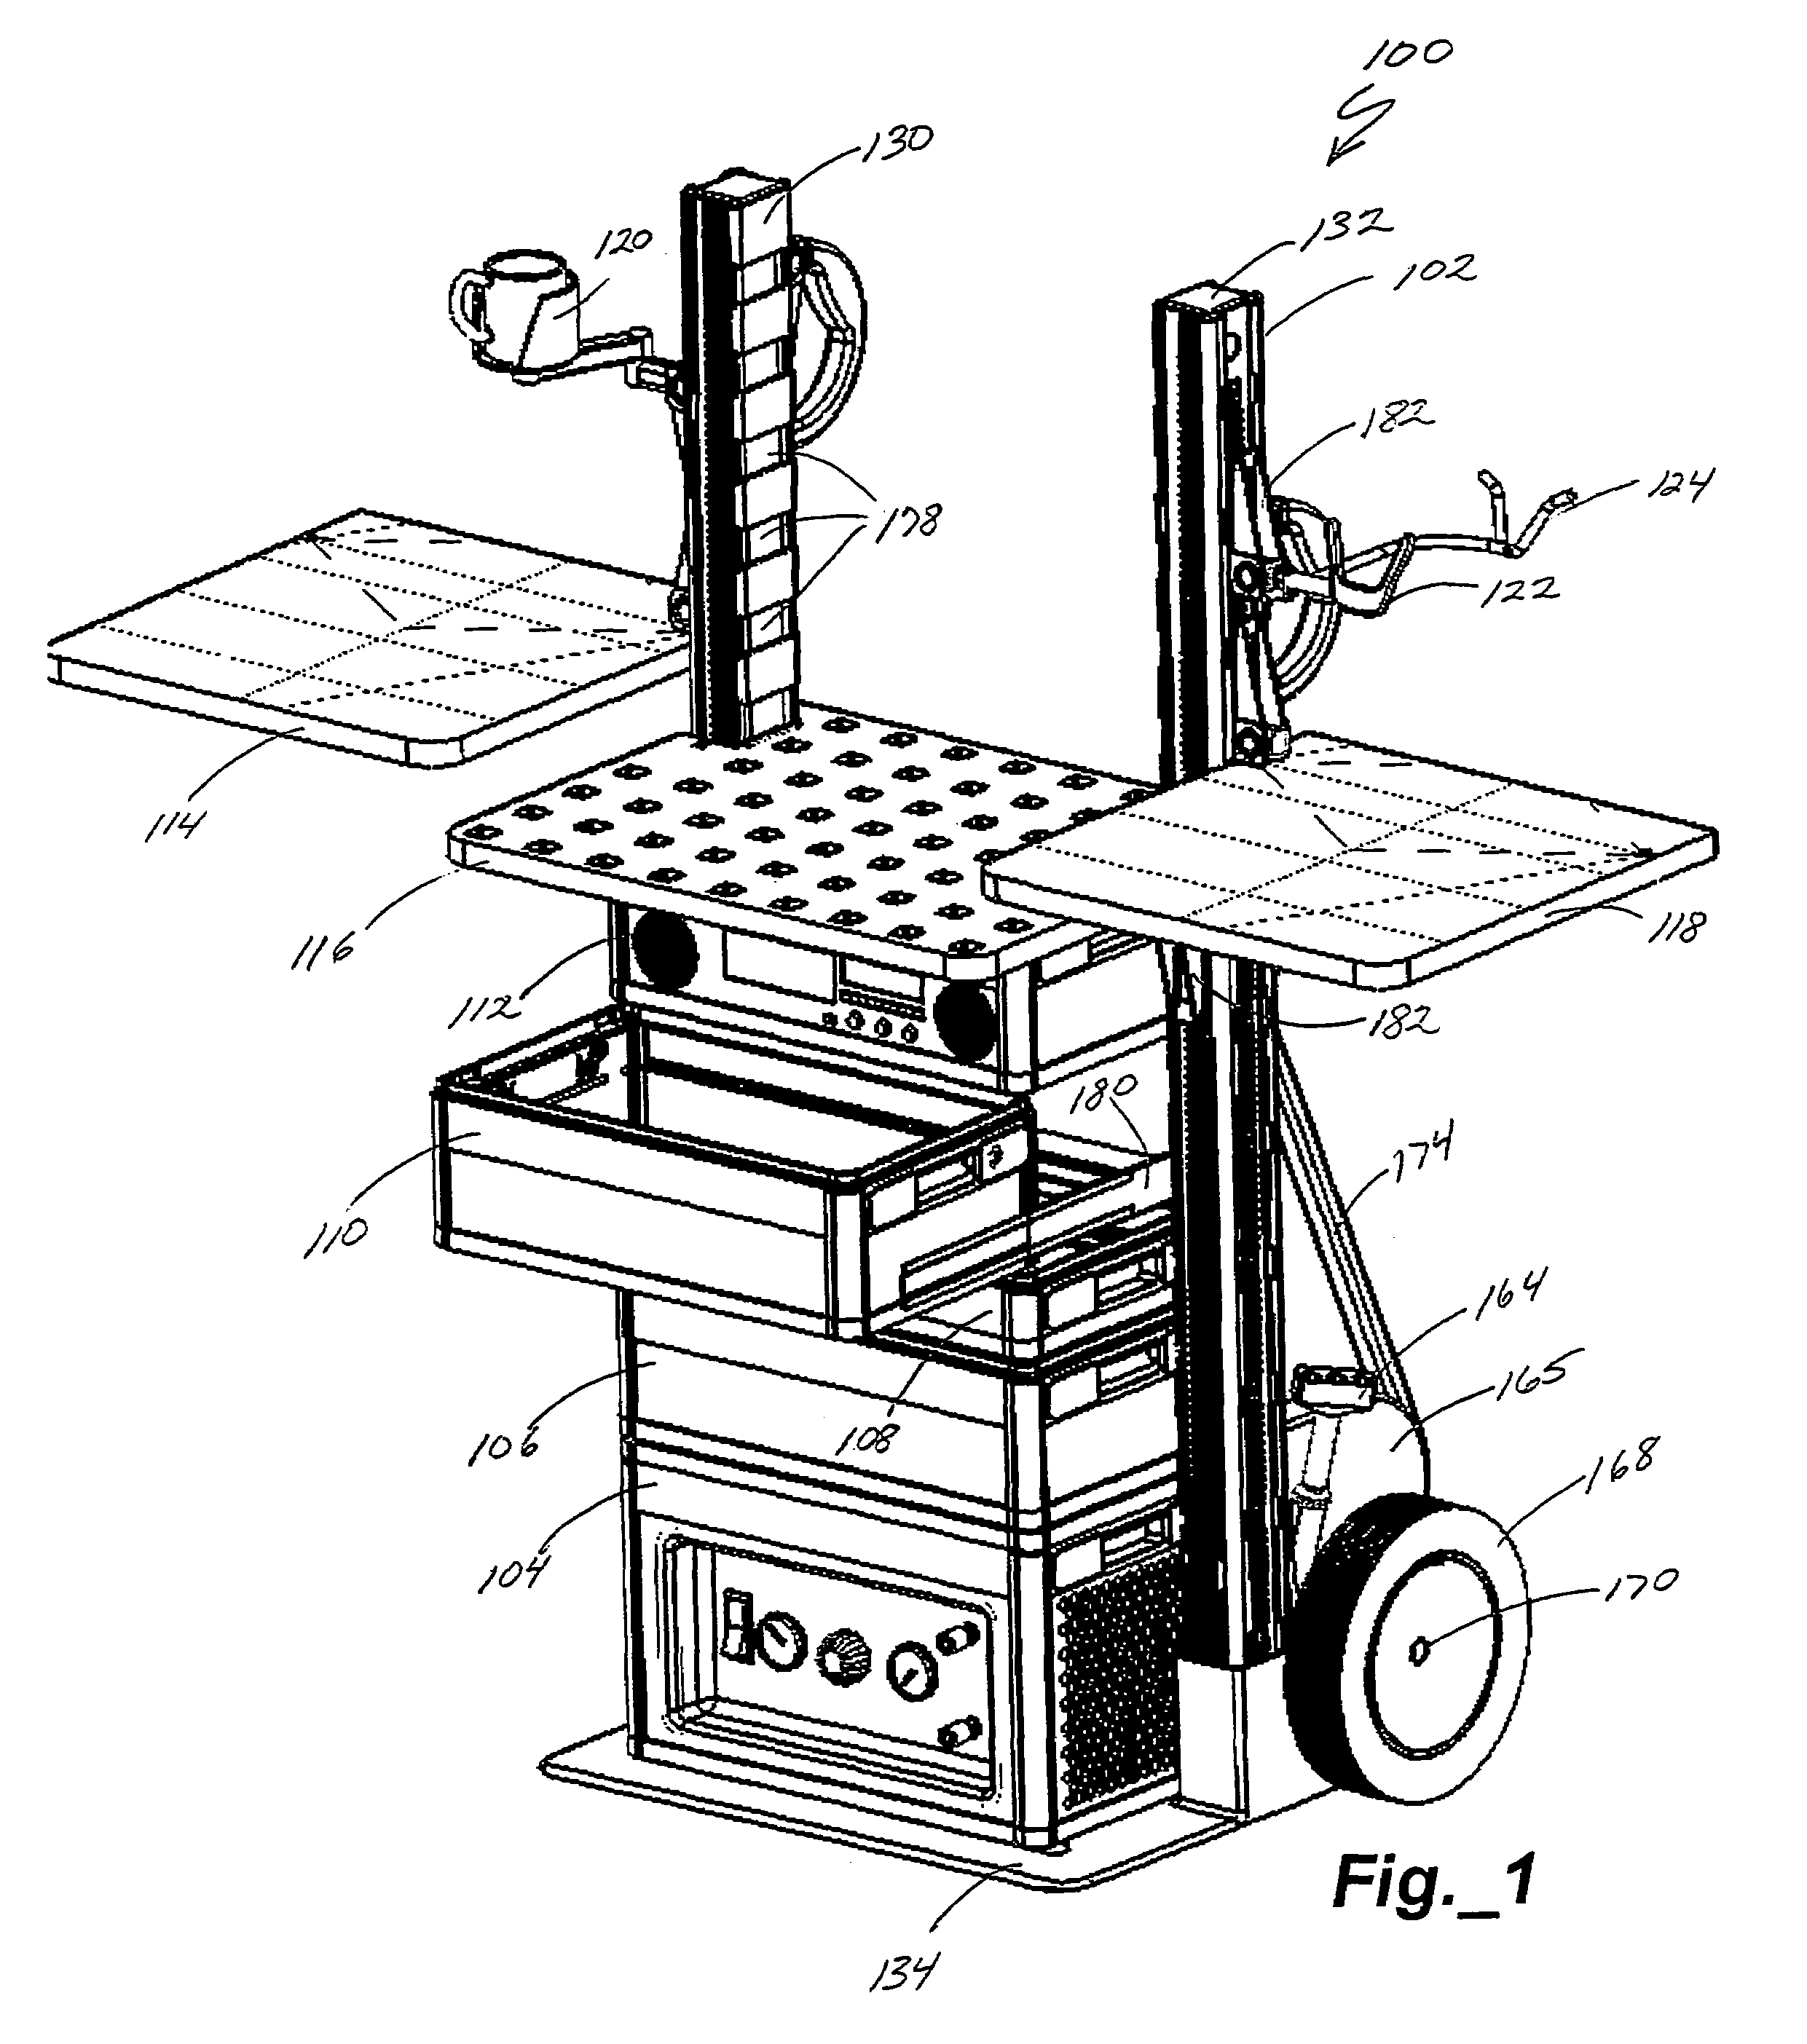 Tool and task box storage, transport, and workbench system